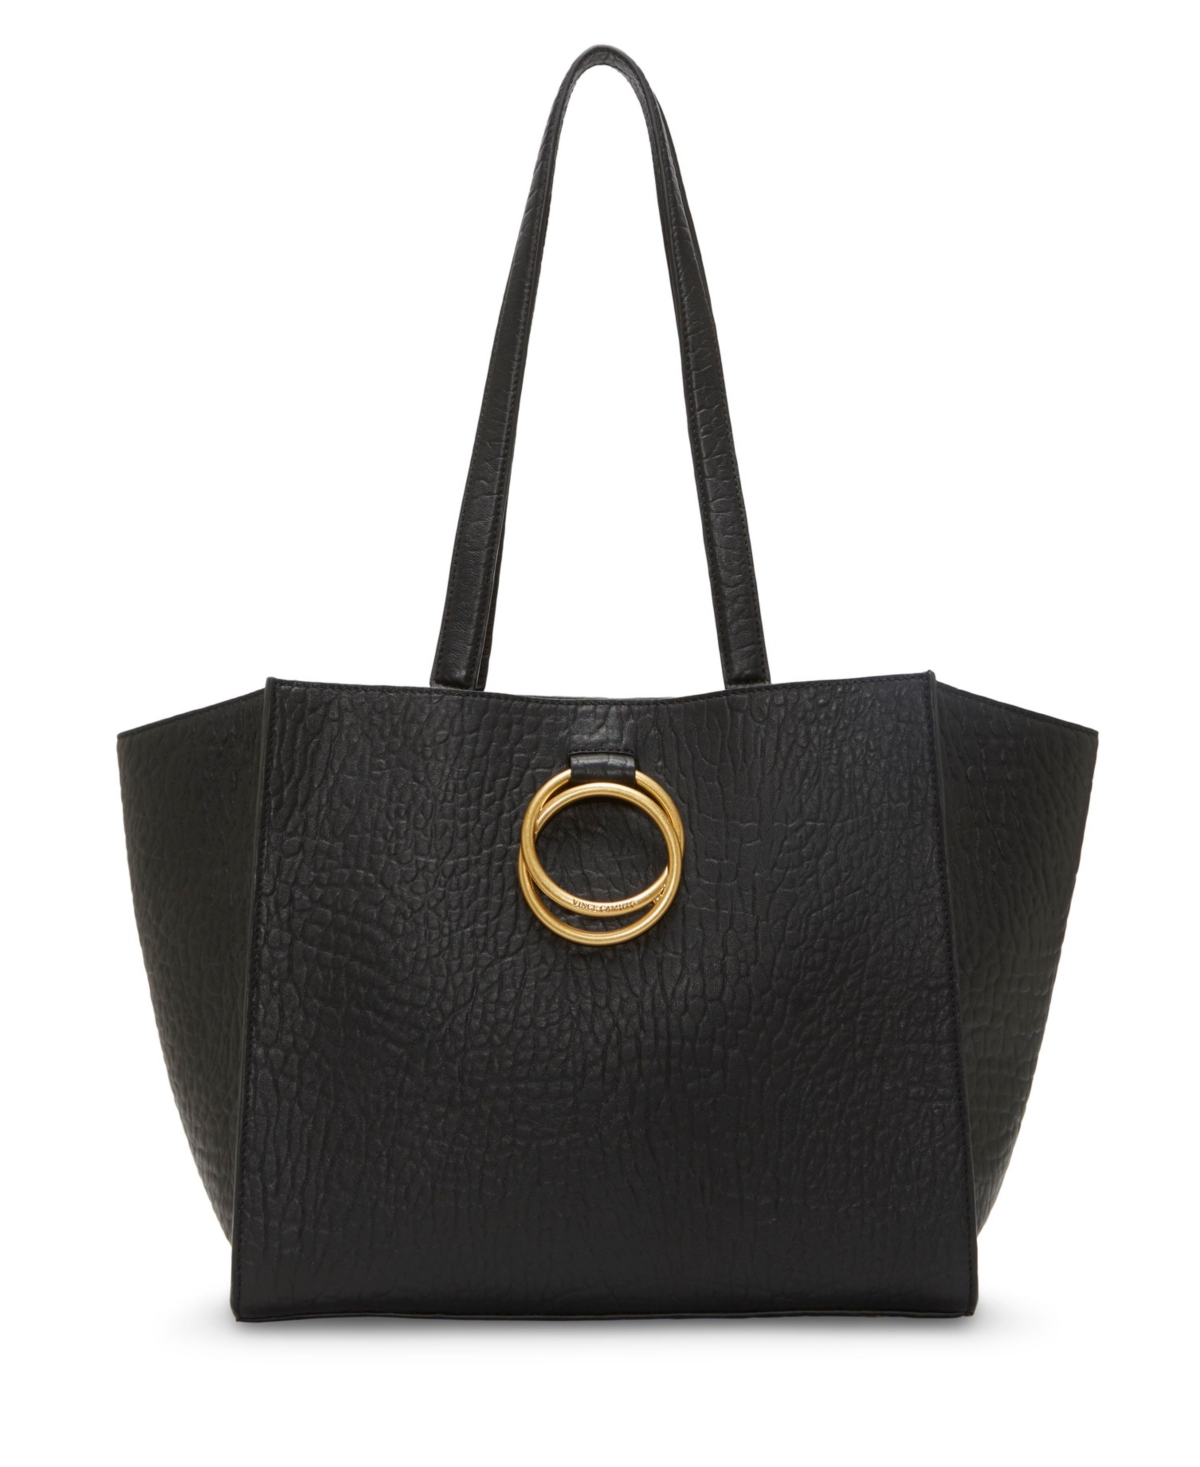 Vince Camuto Women's Livy Large Tote In Black